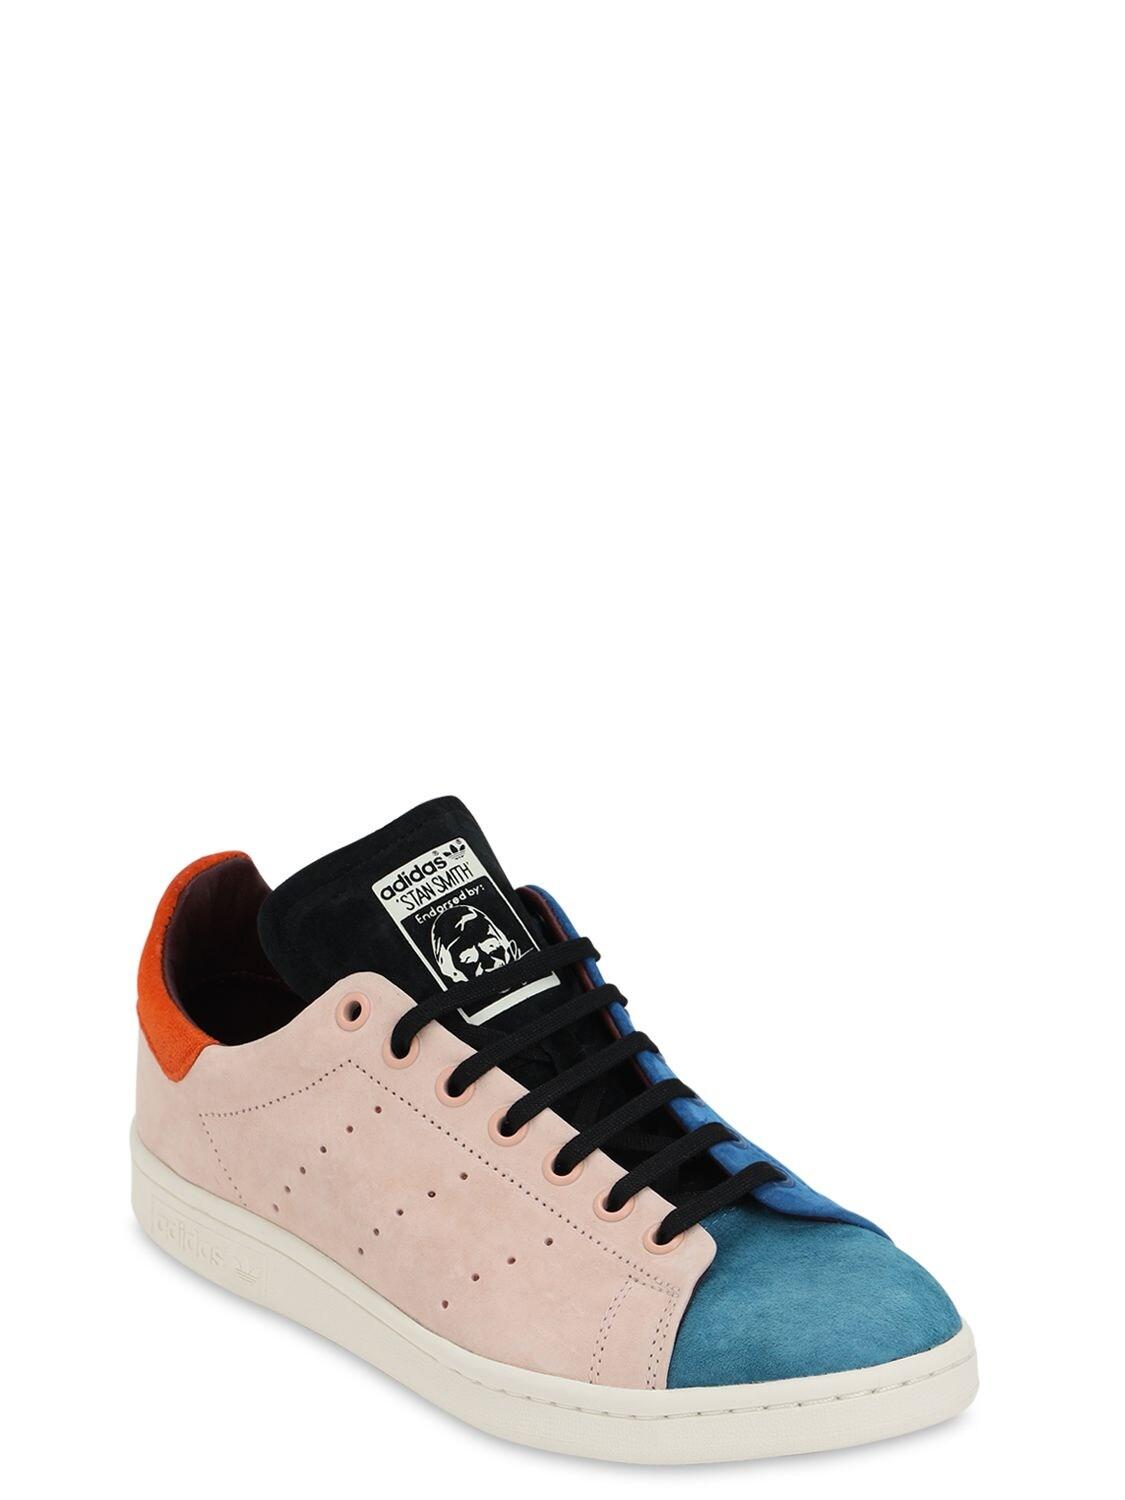 Adidas Originals Leather Stan Smith Recon For Men Save 21 Lyst